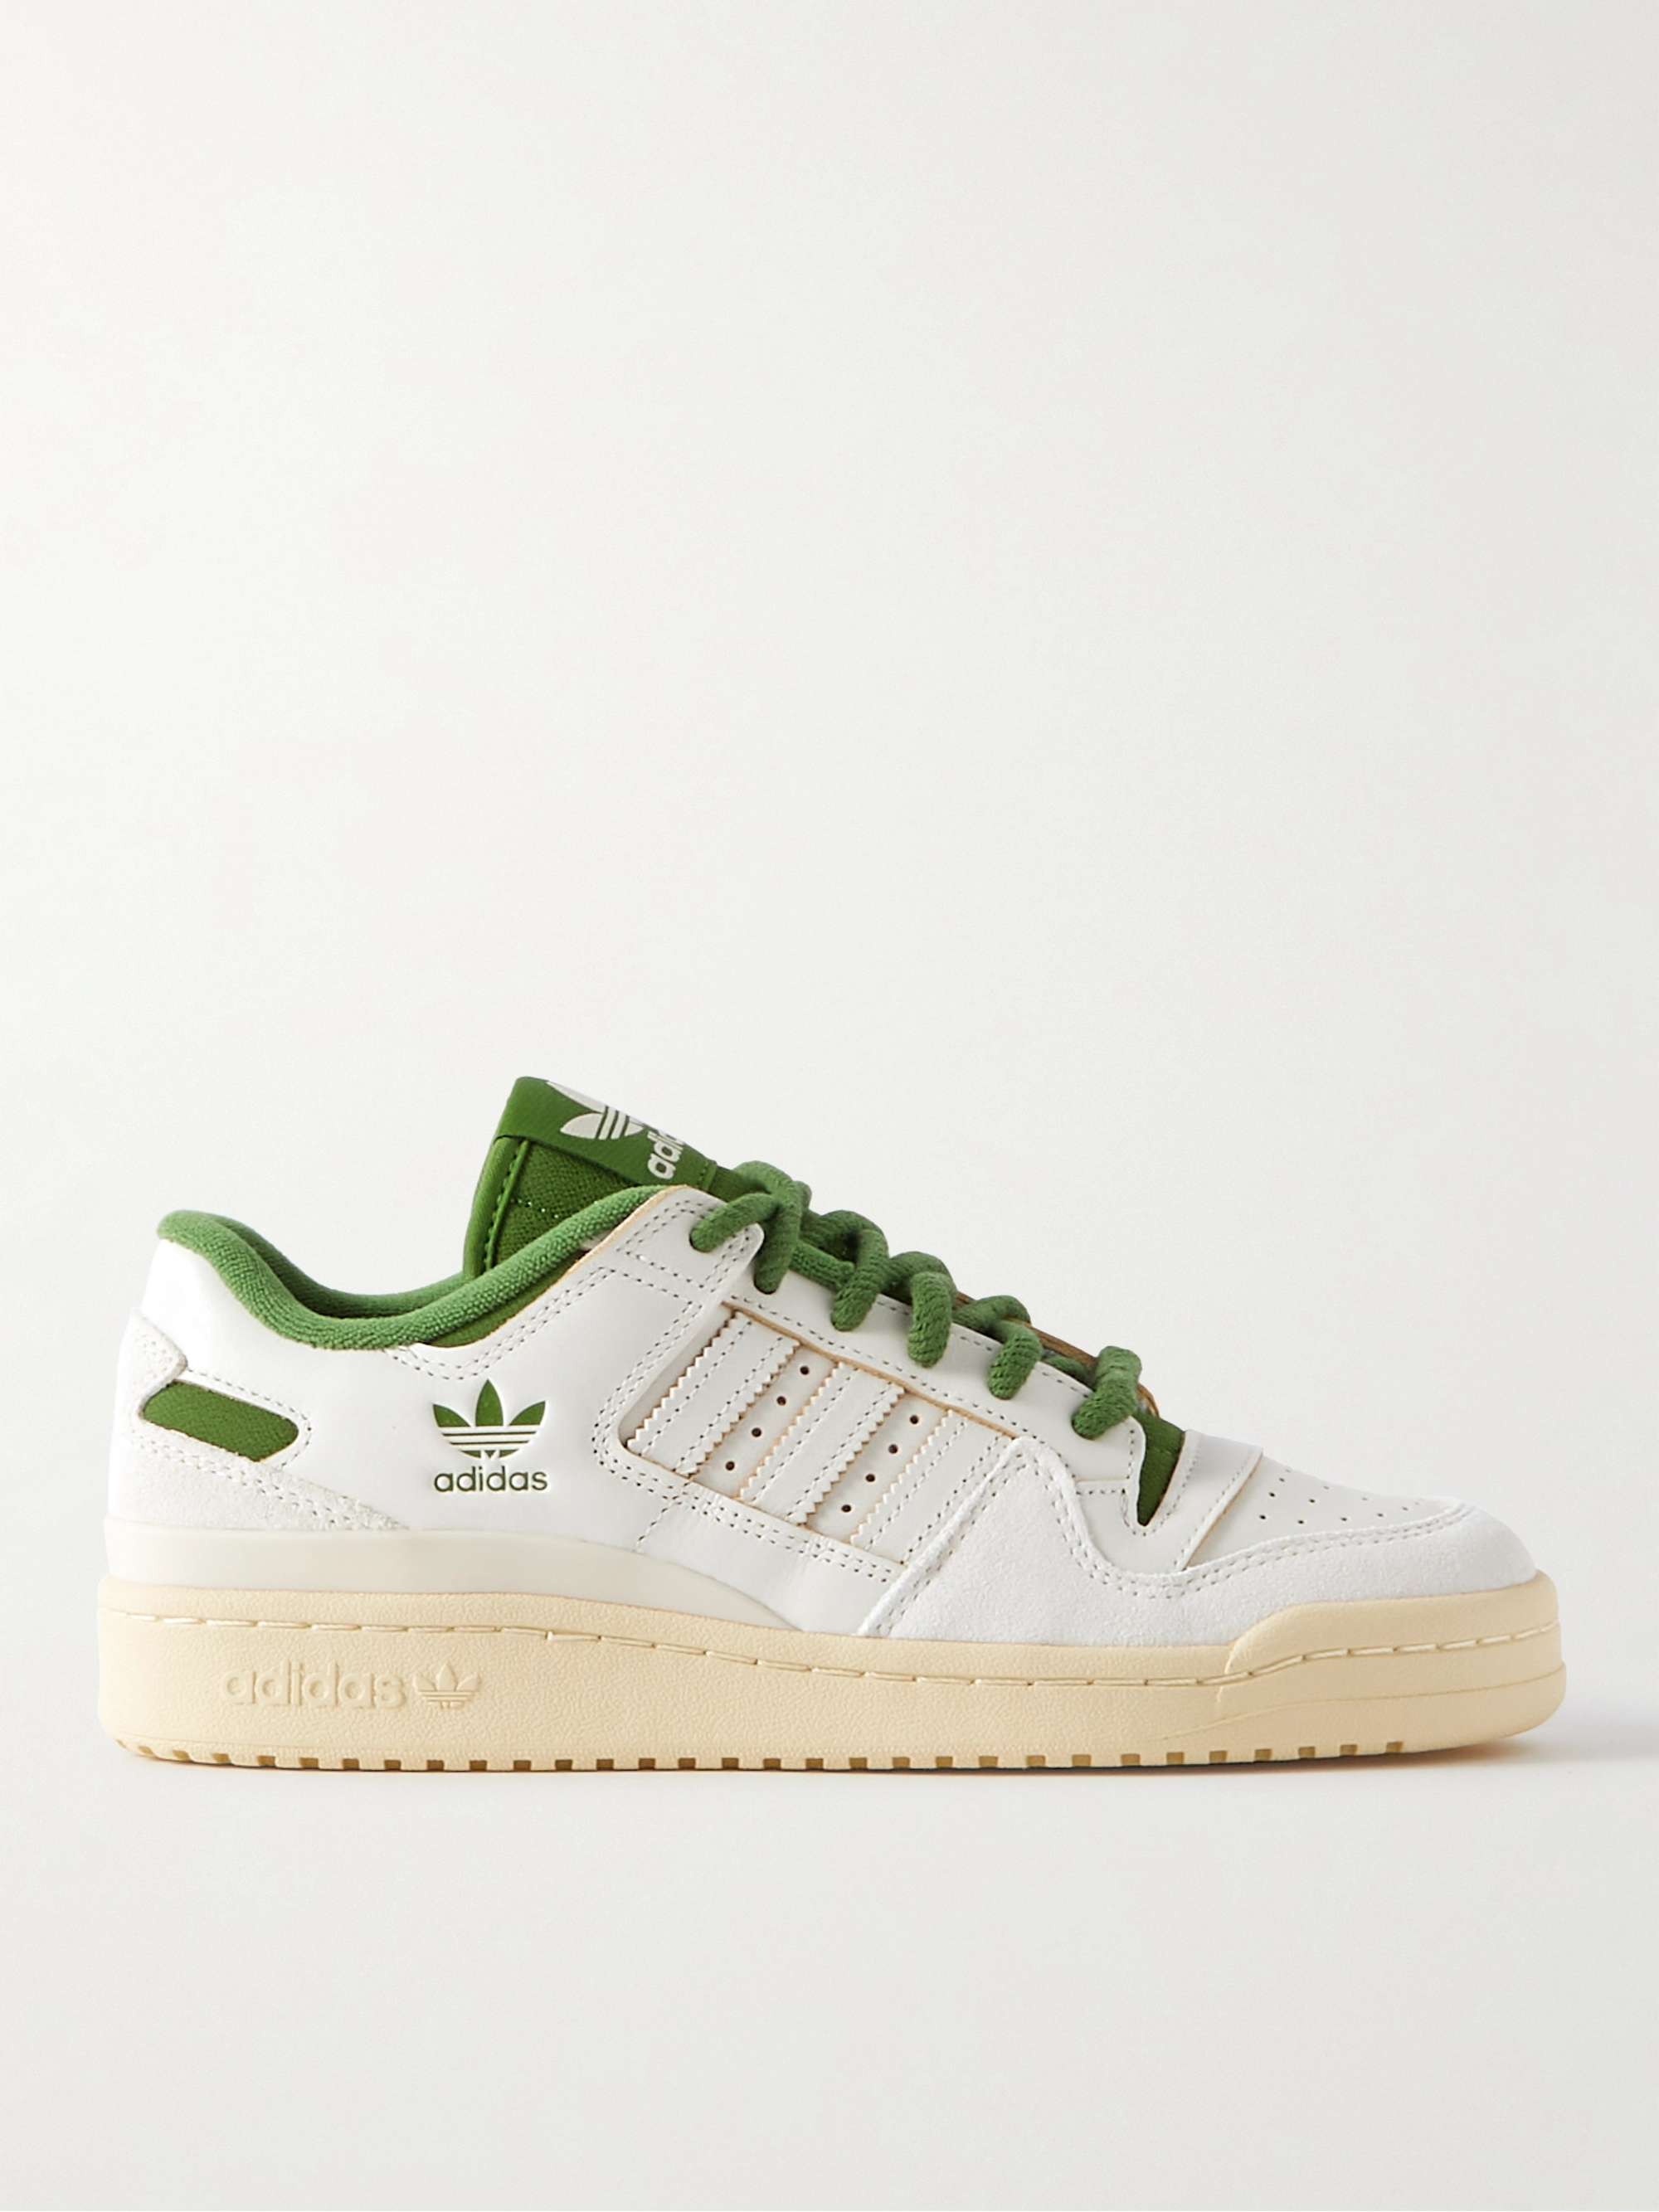 ADIDAS ORIGINALS Forum 84 Leather and Suede Low-Top Sneakers | MR PORTER